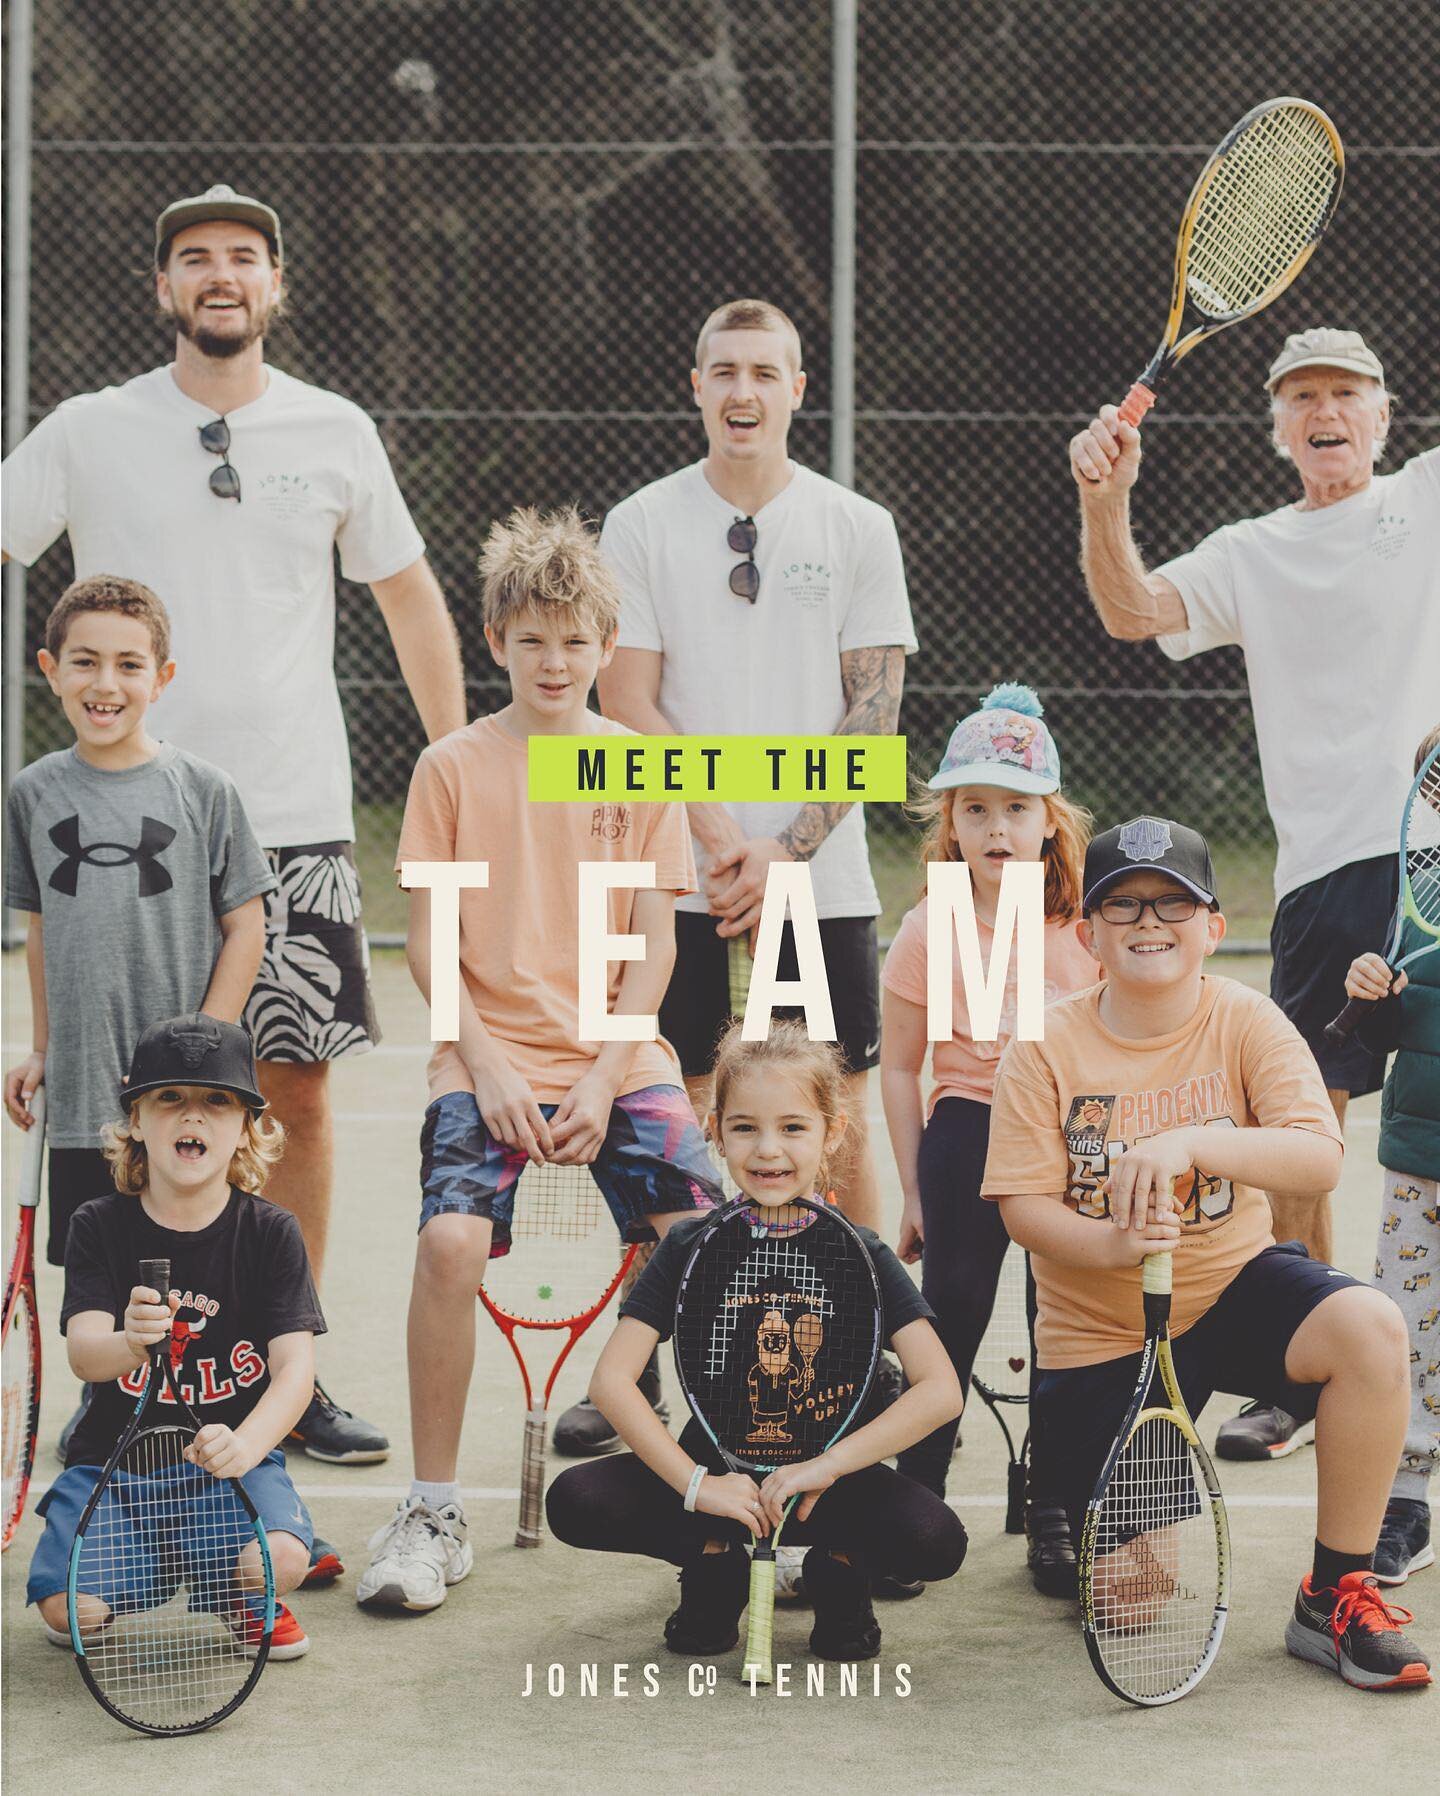 There are a lot of new faces so we thought we would re-introduce ourselves 👋 

Meet our coaching staff.....

👋 Daniel 
Director/ Head Coach
Daniel grew up playing tennis and has a passion for health and education. 
Daniel coaches groups and private